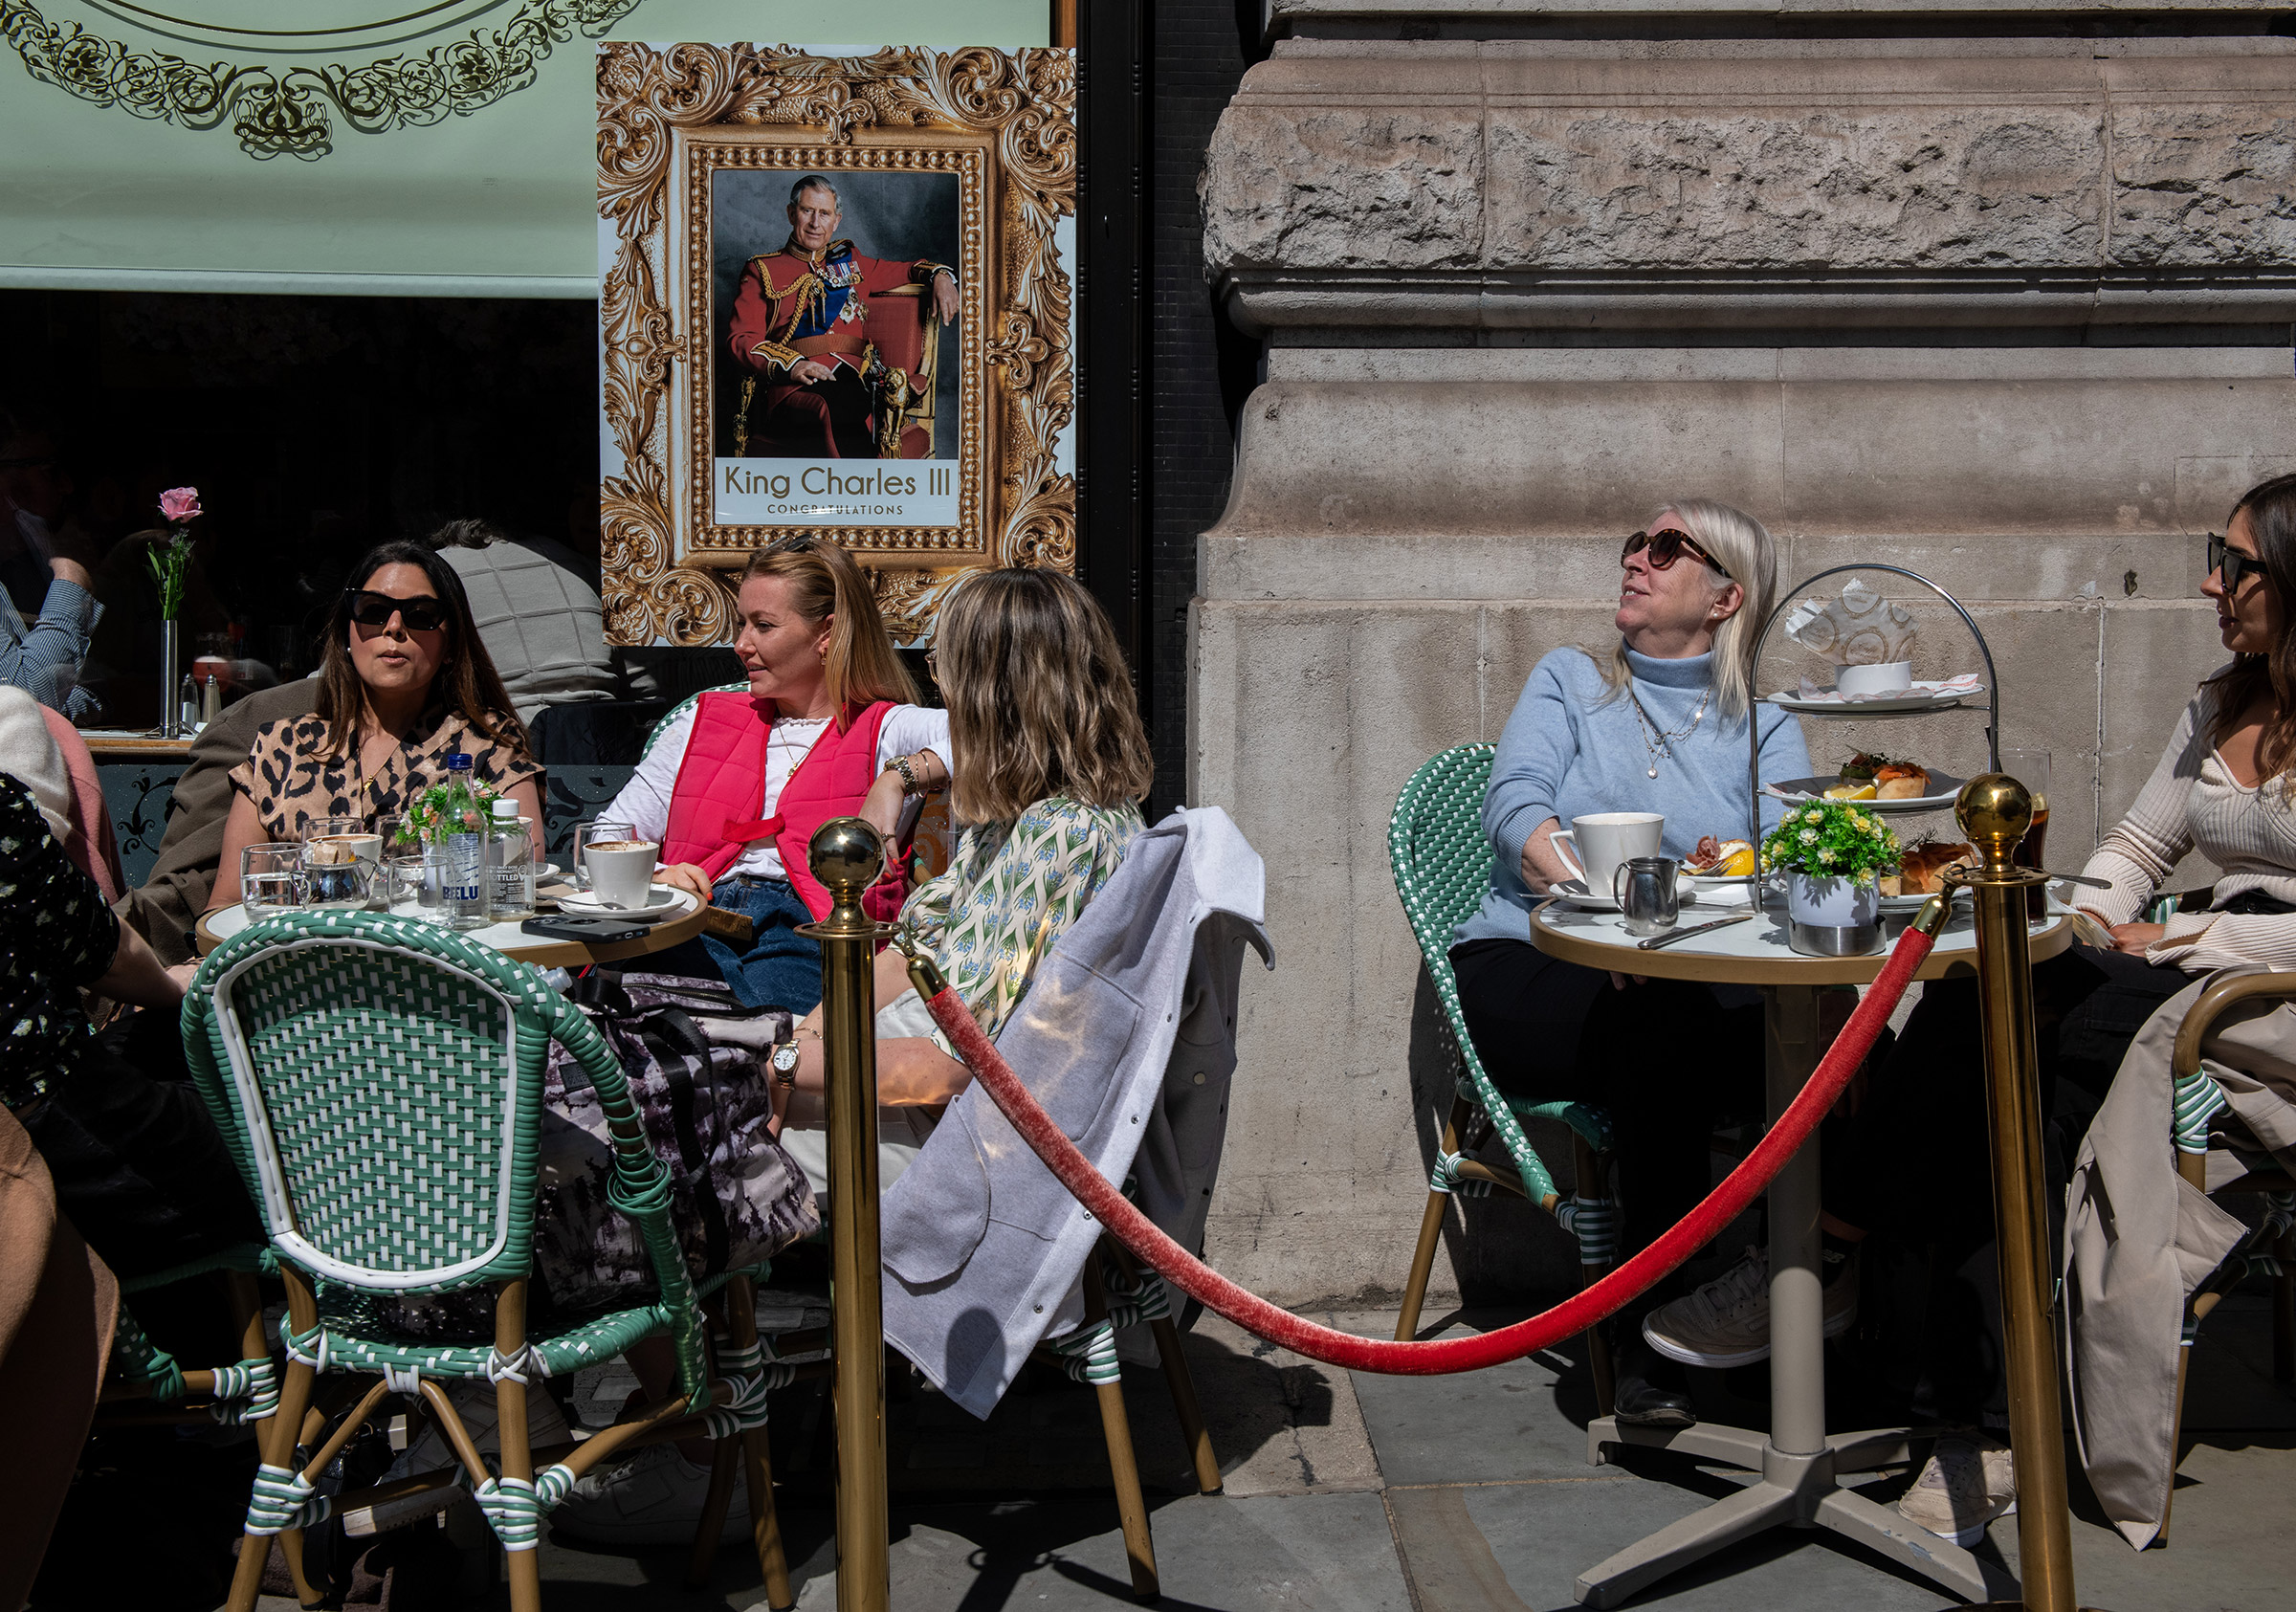 People have afternoon tea outside a cafe next to a poster of King Charles III on April 29. (Chris J Ratcliffe—Getty Images)